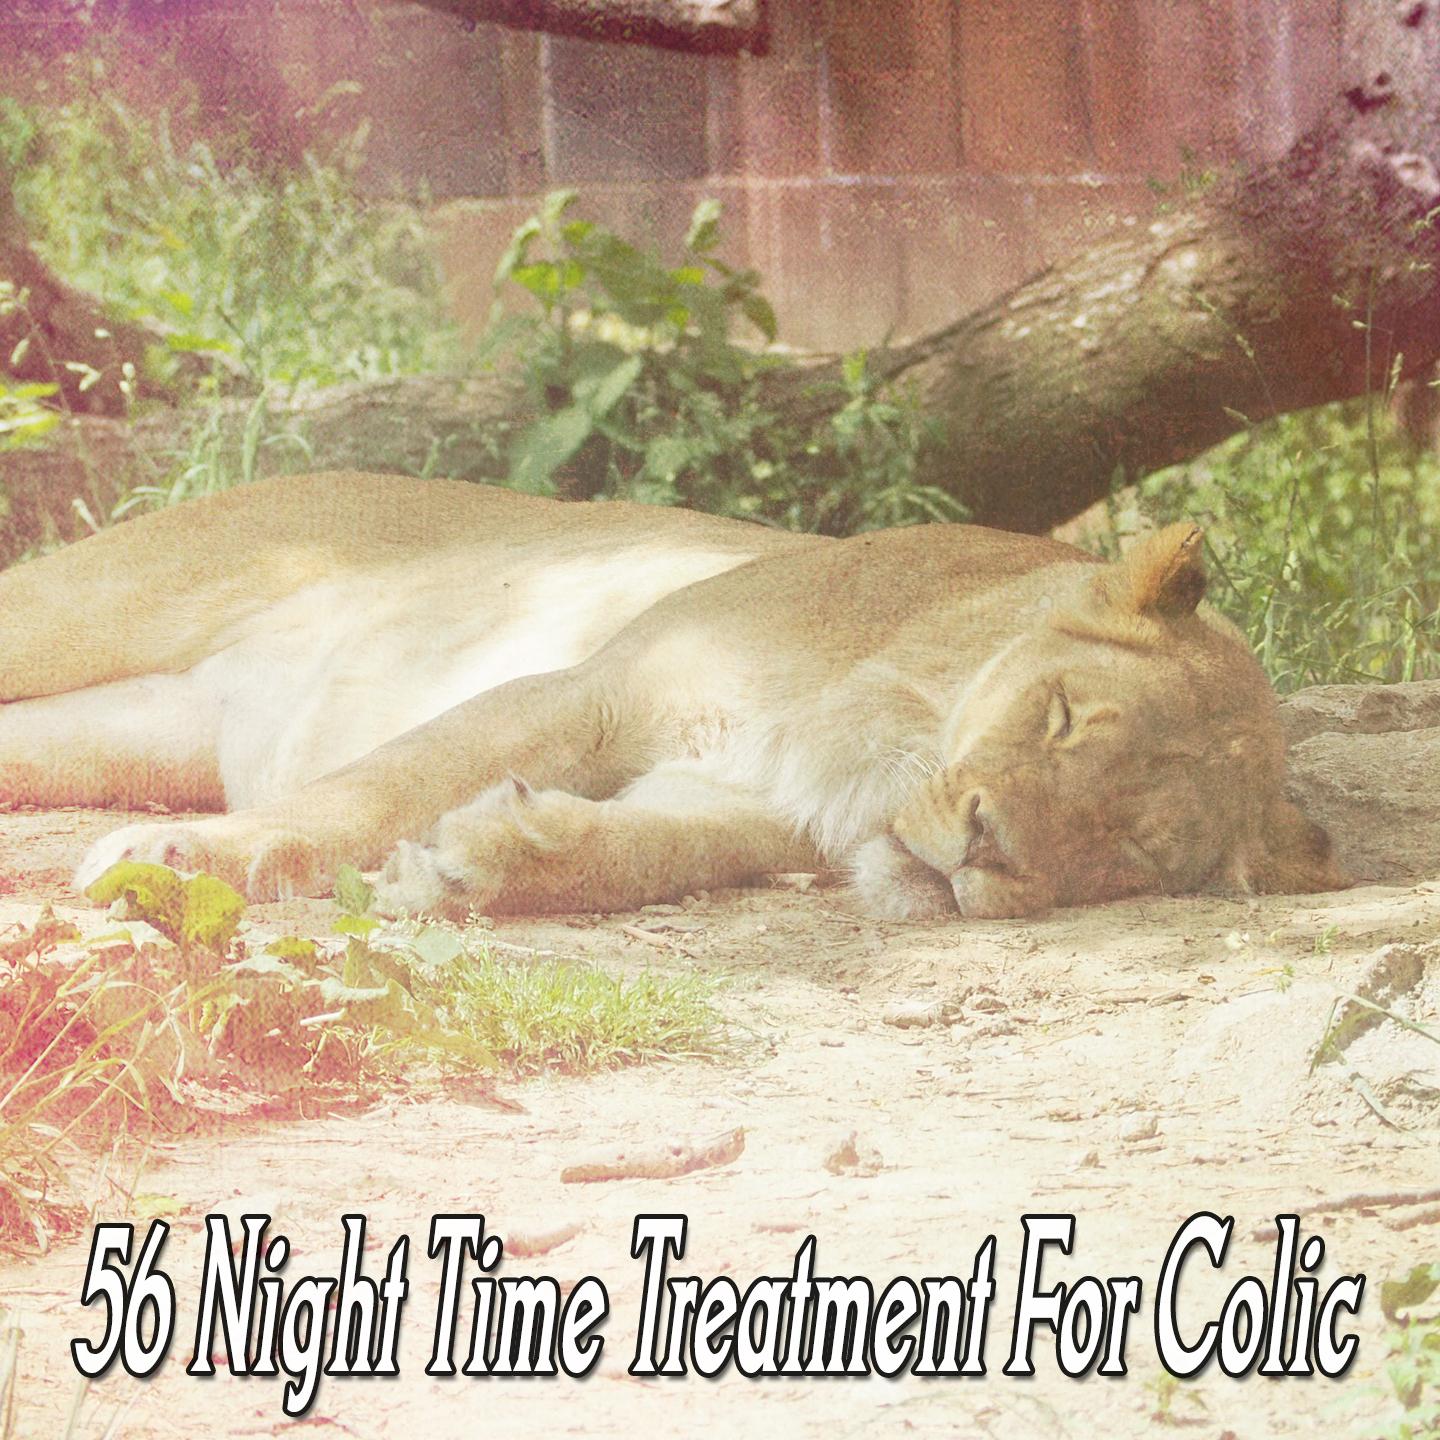 56 Night Time Treatment For Colic